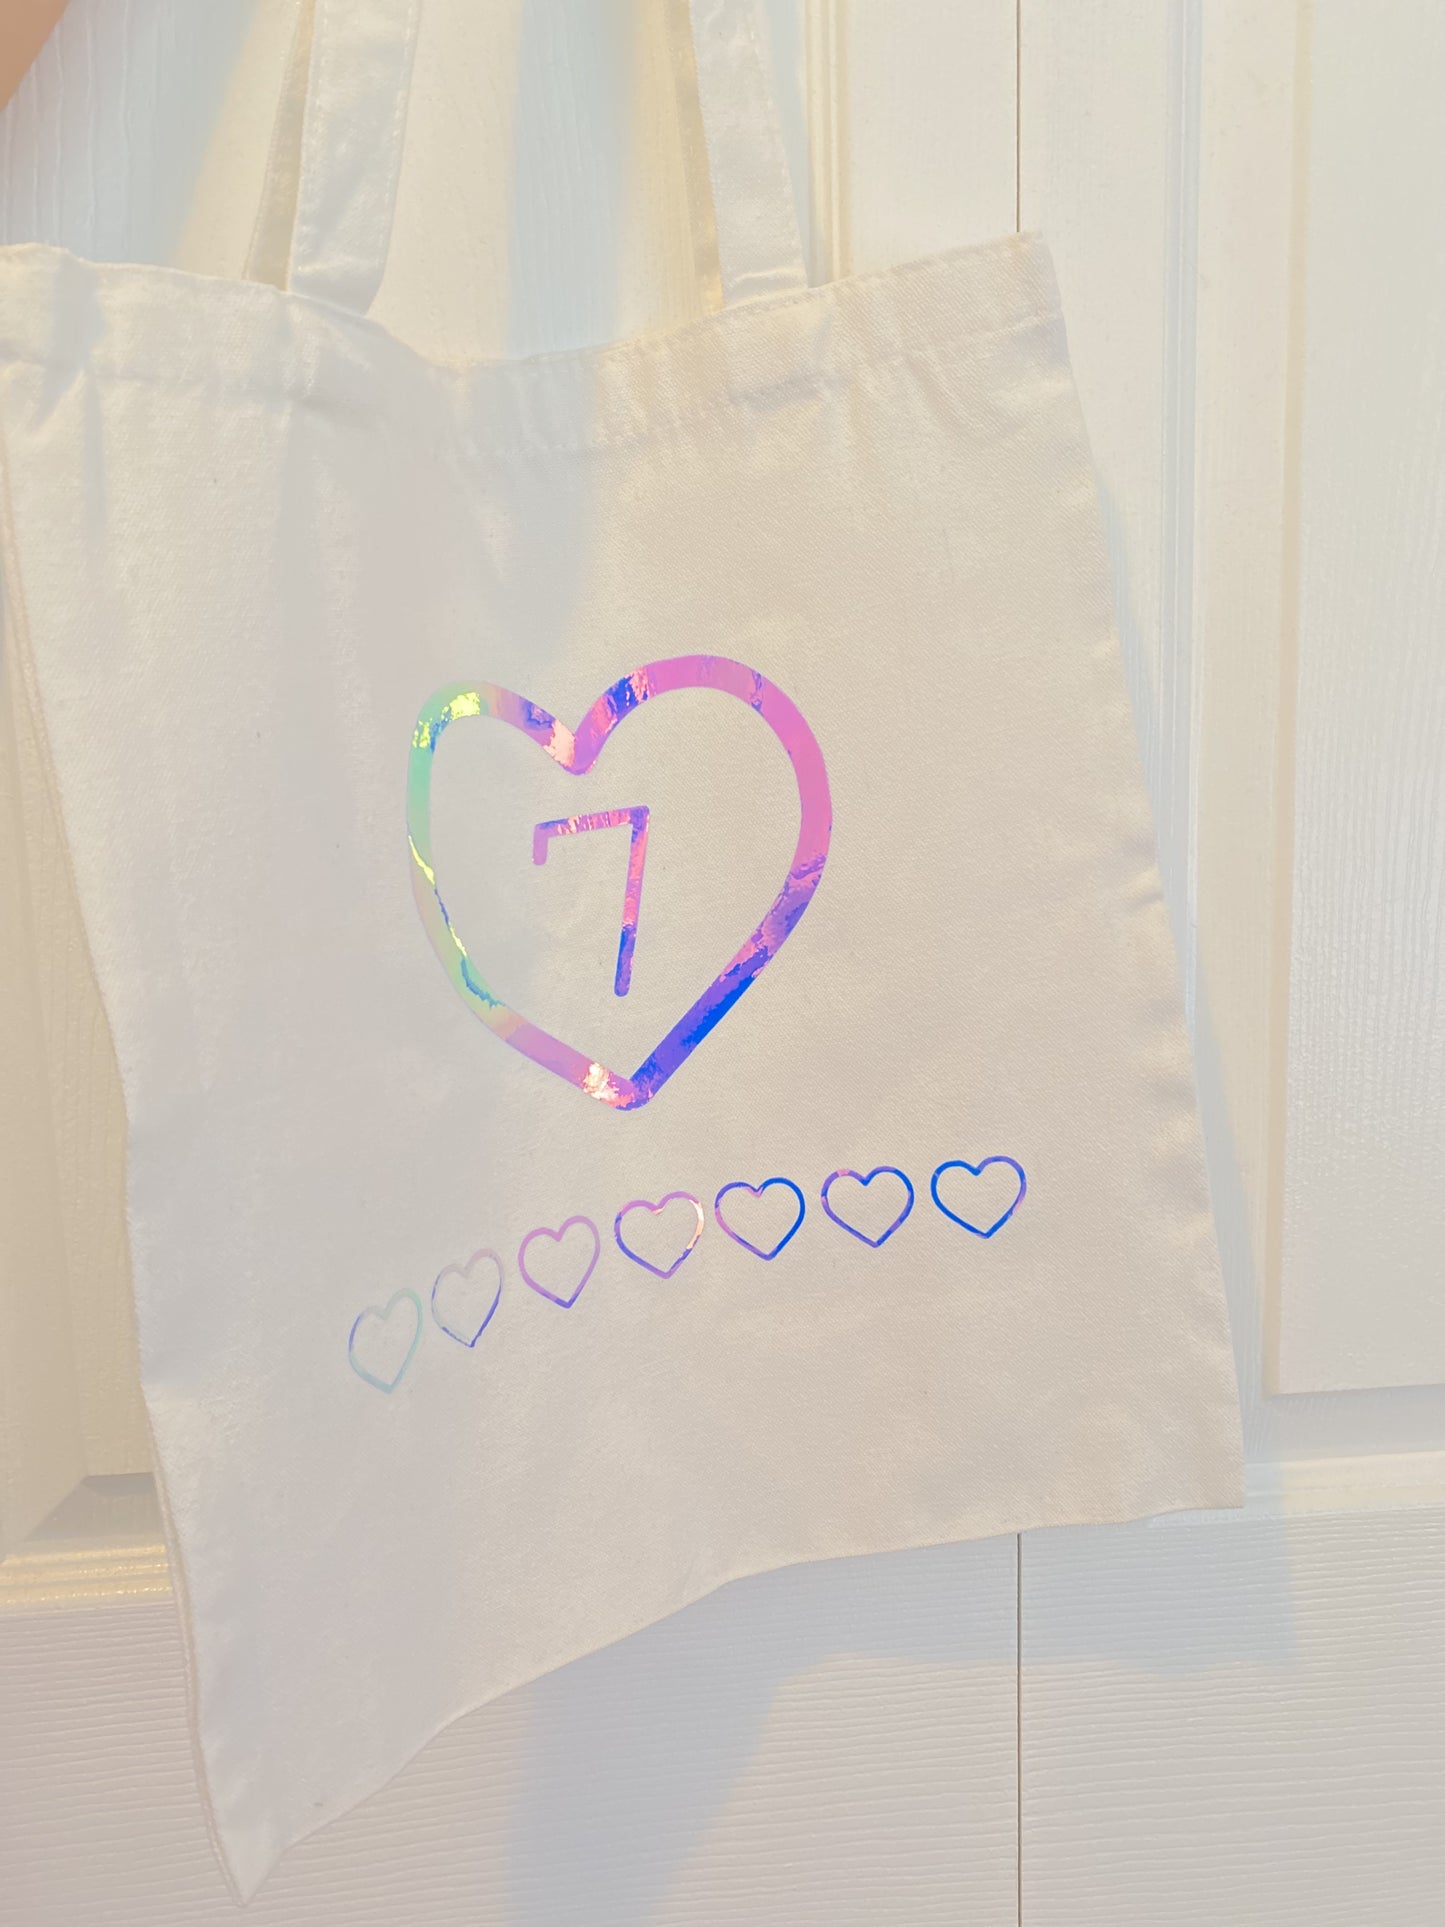 Tote bag- Heart Holographic - 7 Hearts